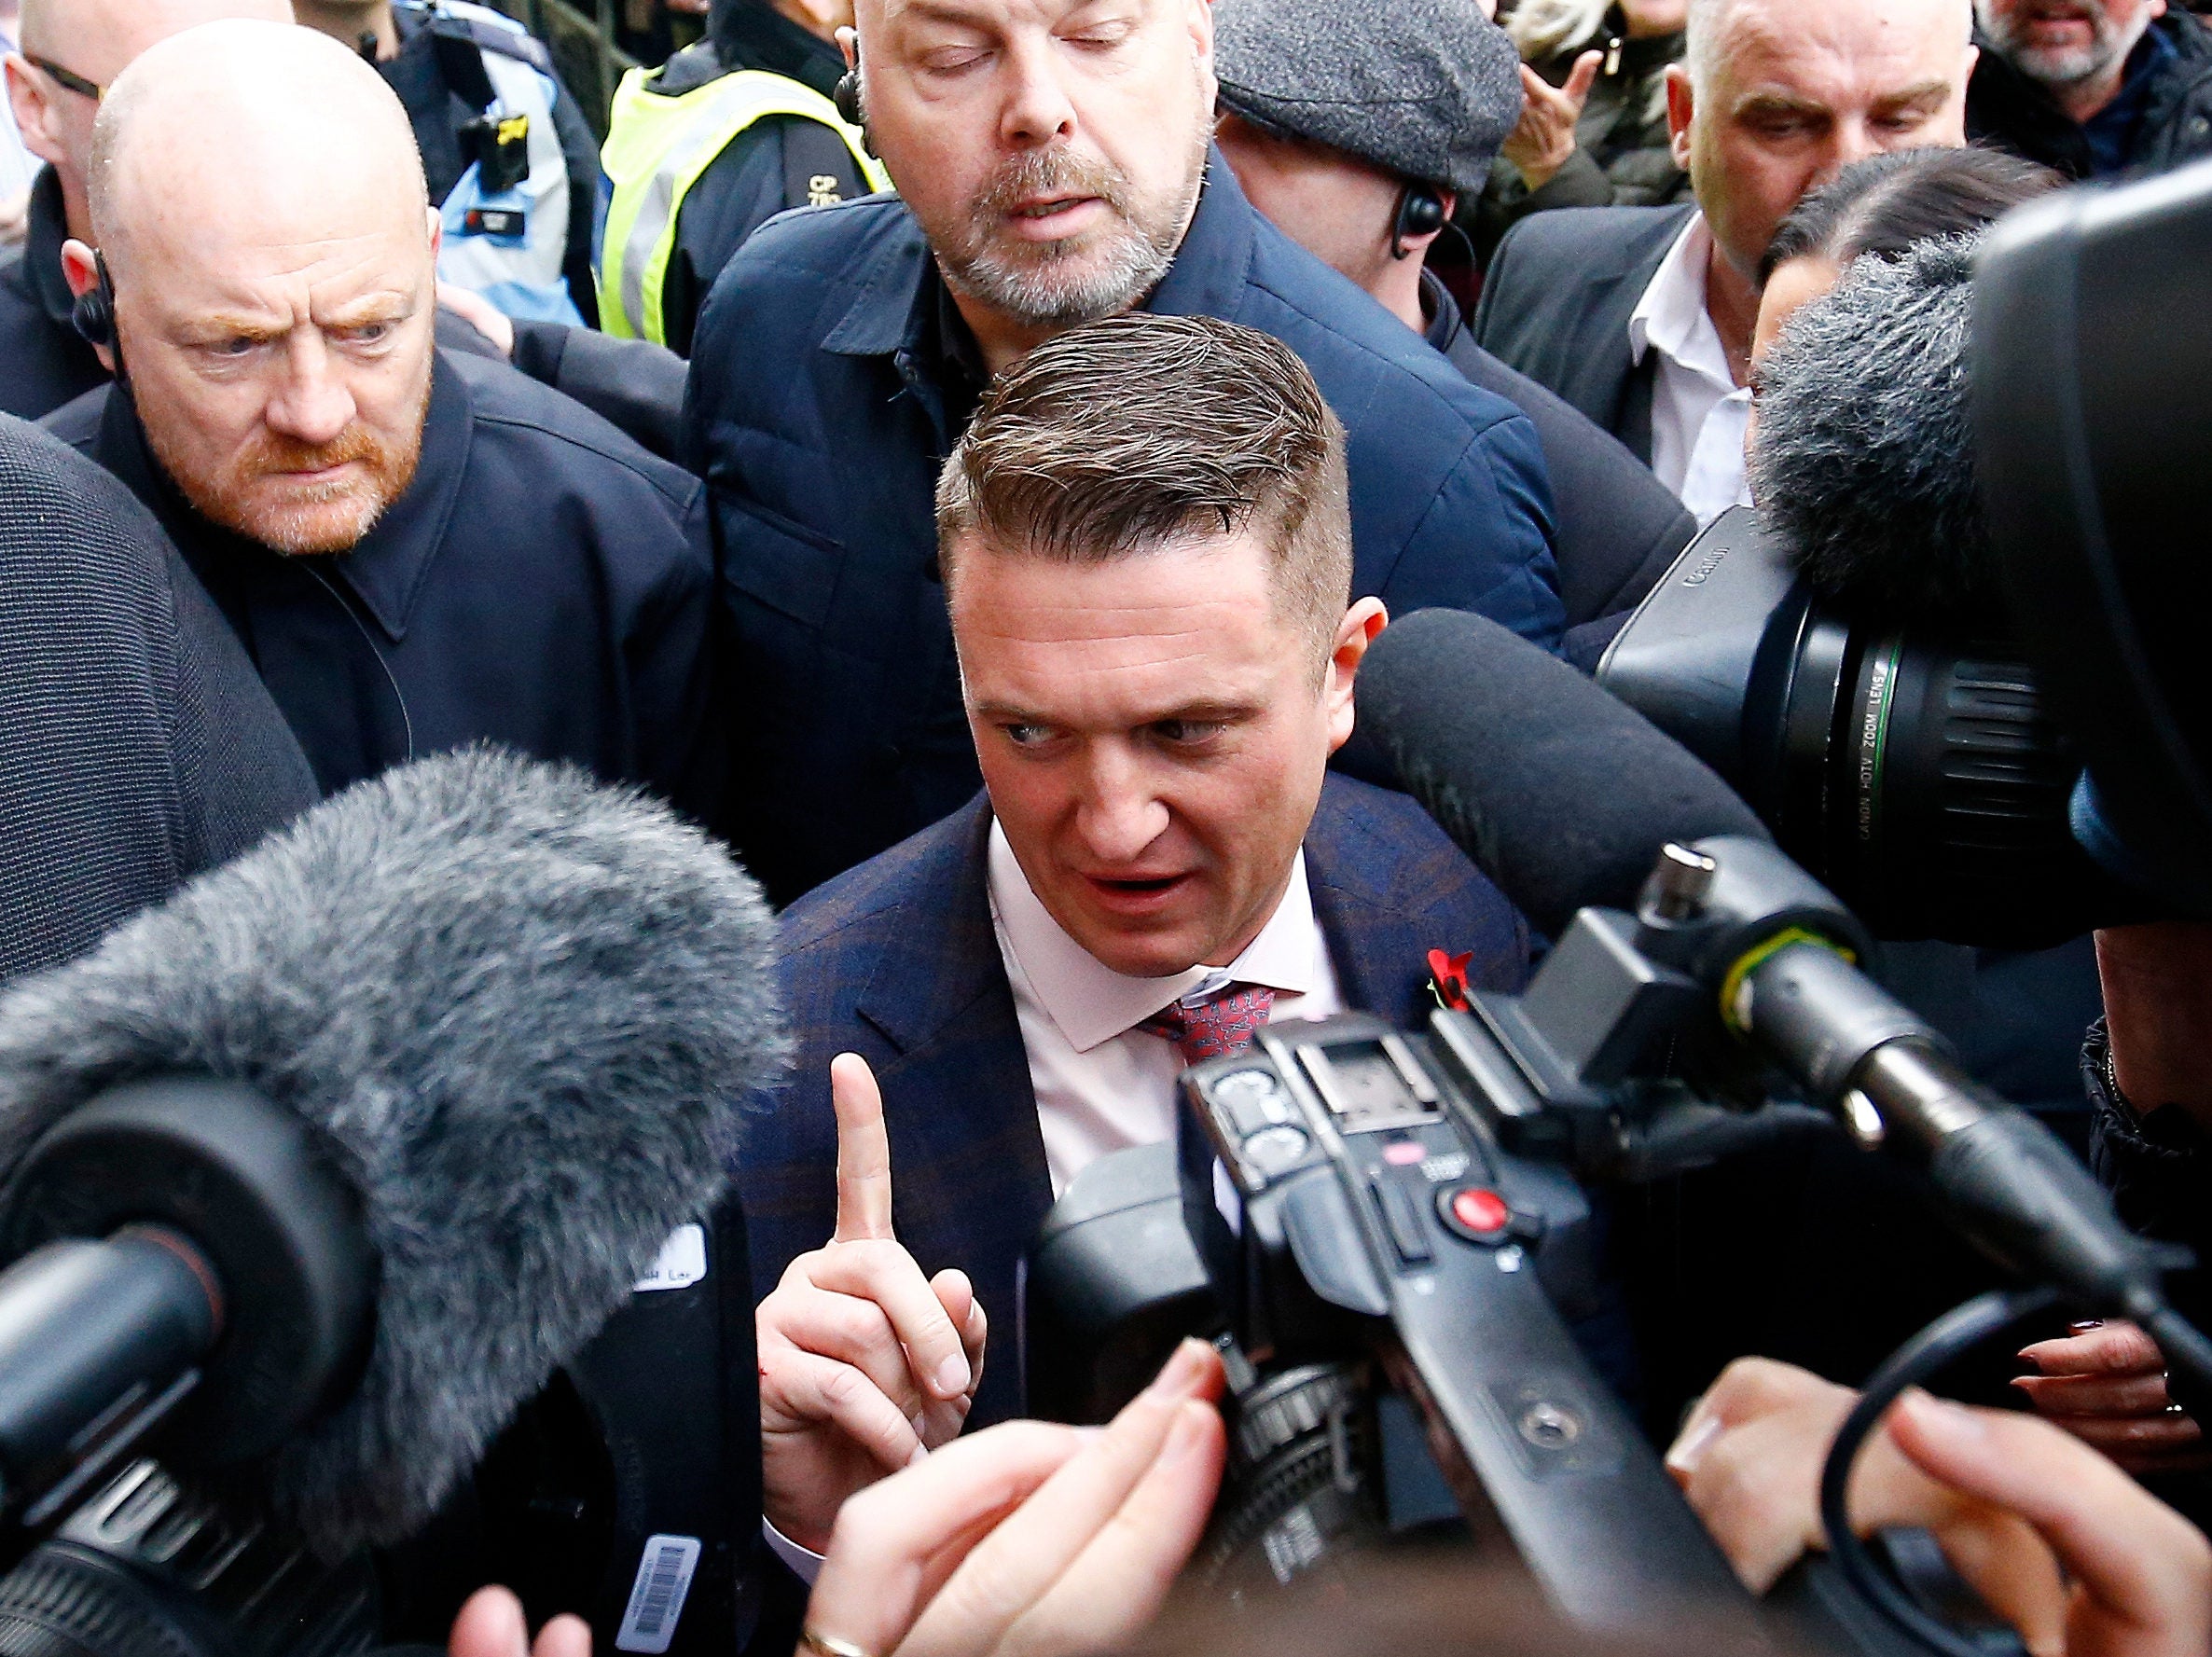 Youtube must 'reconsider judgment' on Tommy Robinson videos, says Culture Secretary